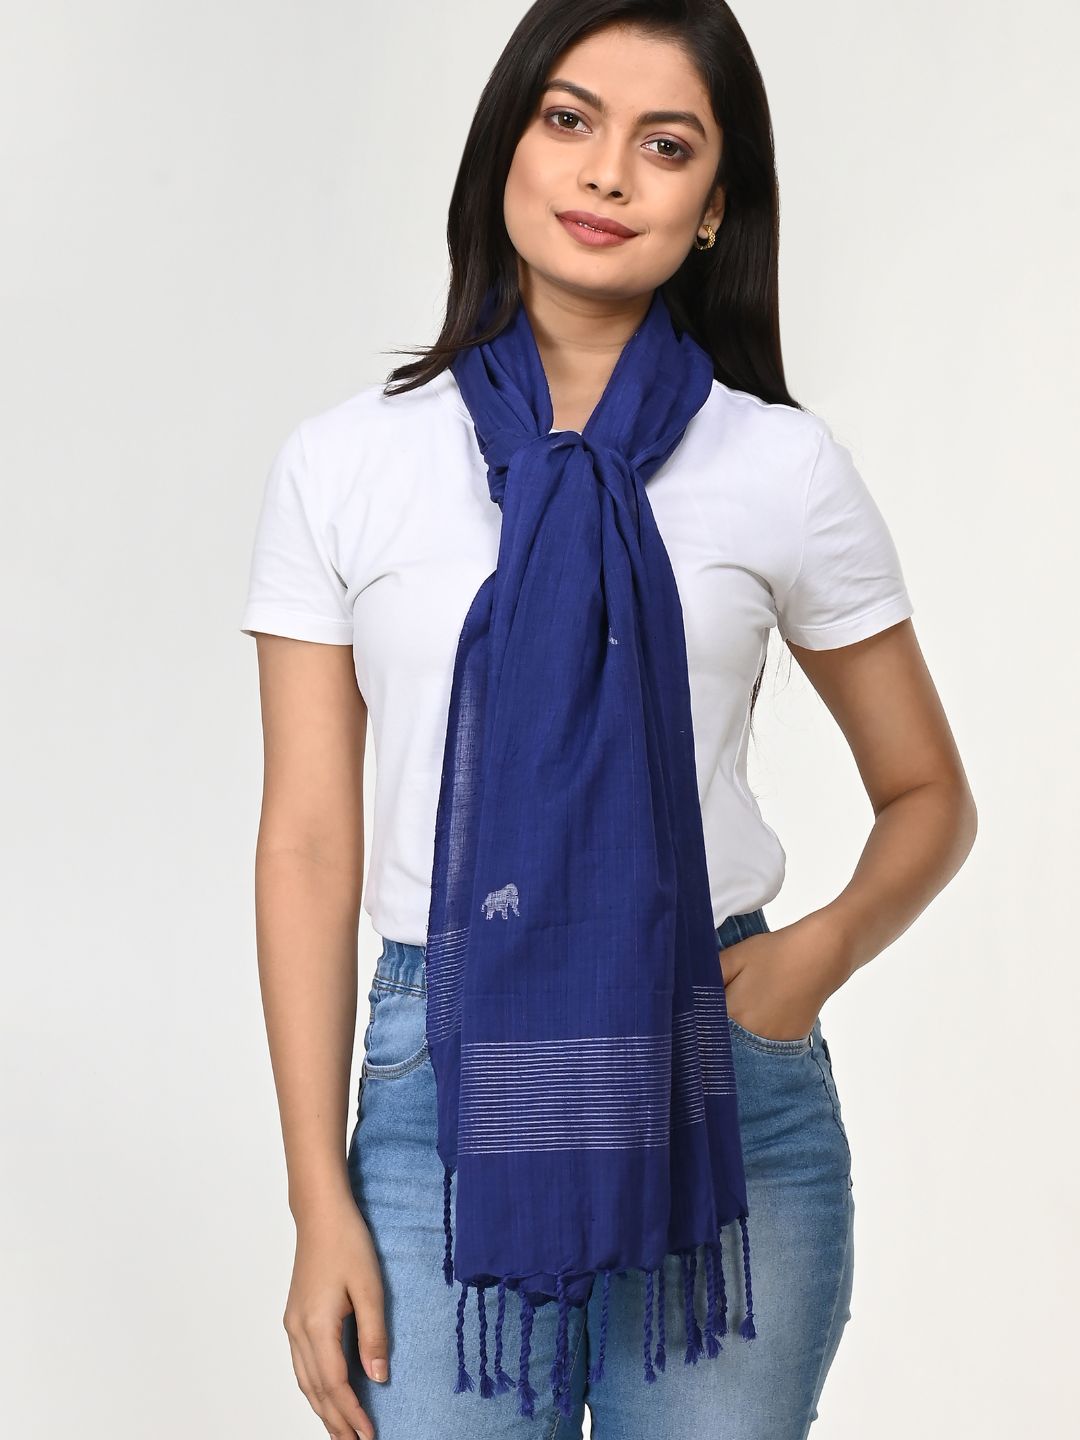 Handcrafted Blue Cotton Bengal Jamdani Stole for women